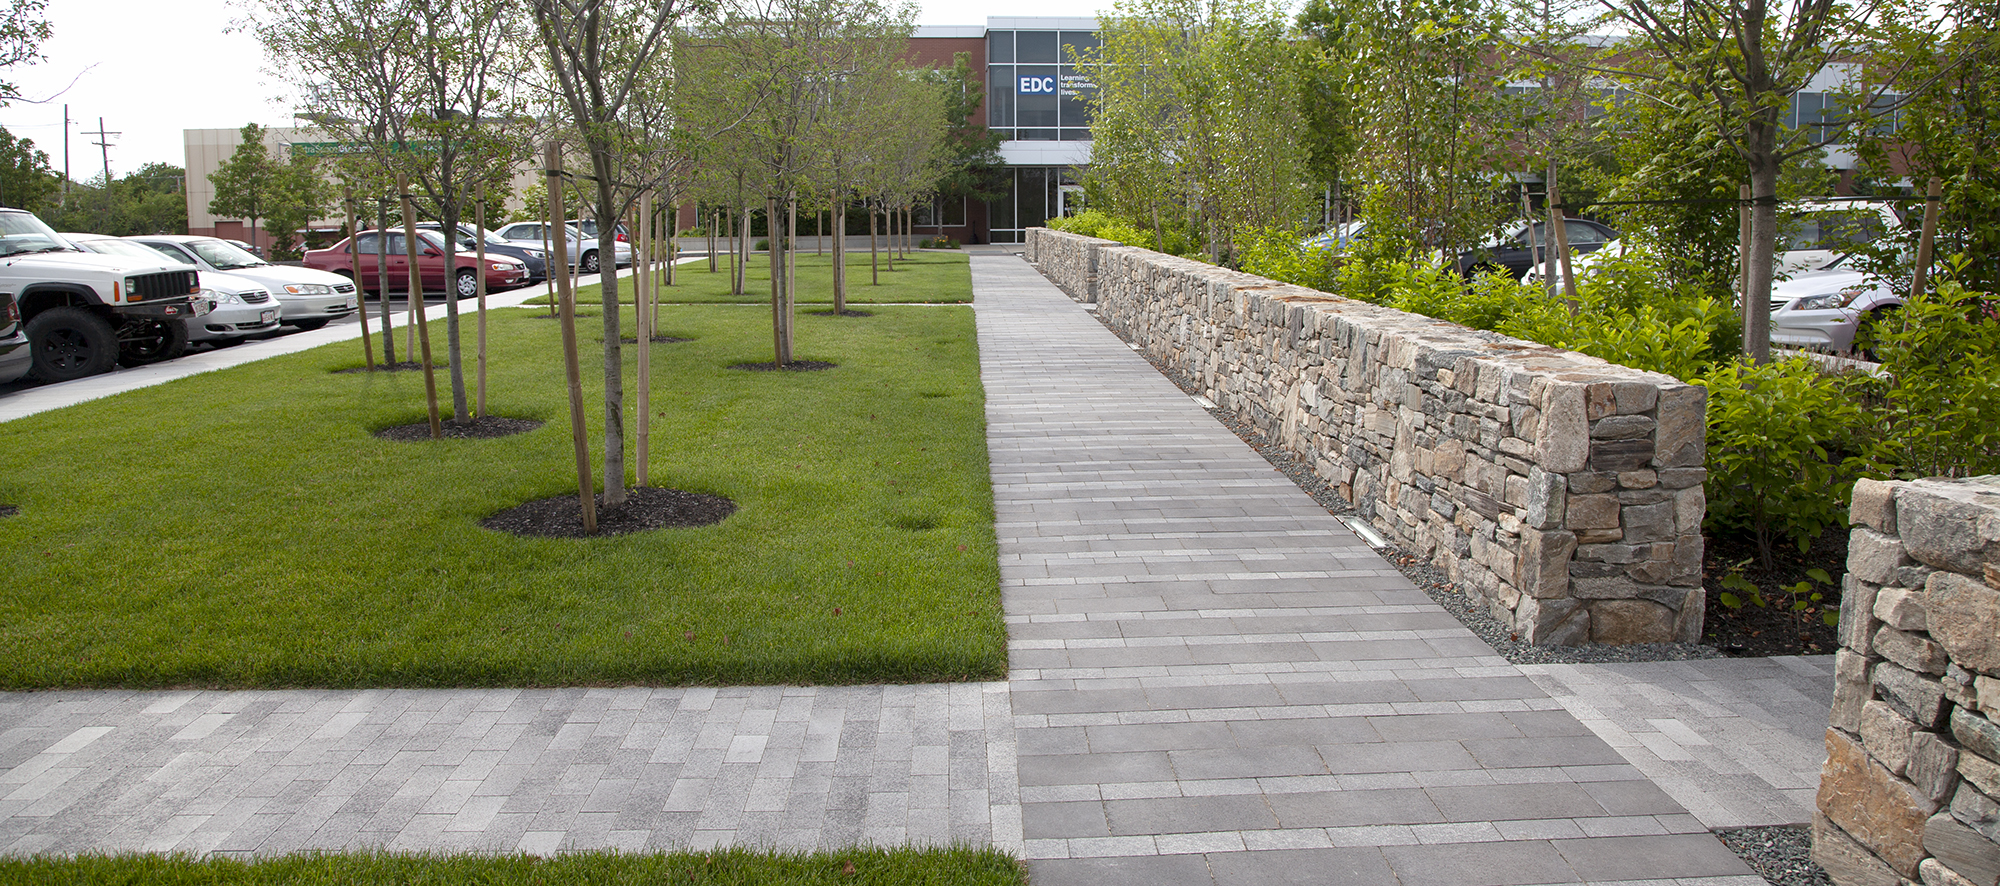 Umbriano pavers alternate between white and grey running parallel with a retaining wall, with more pavers leading to the parking lot.